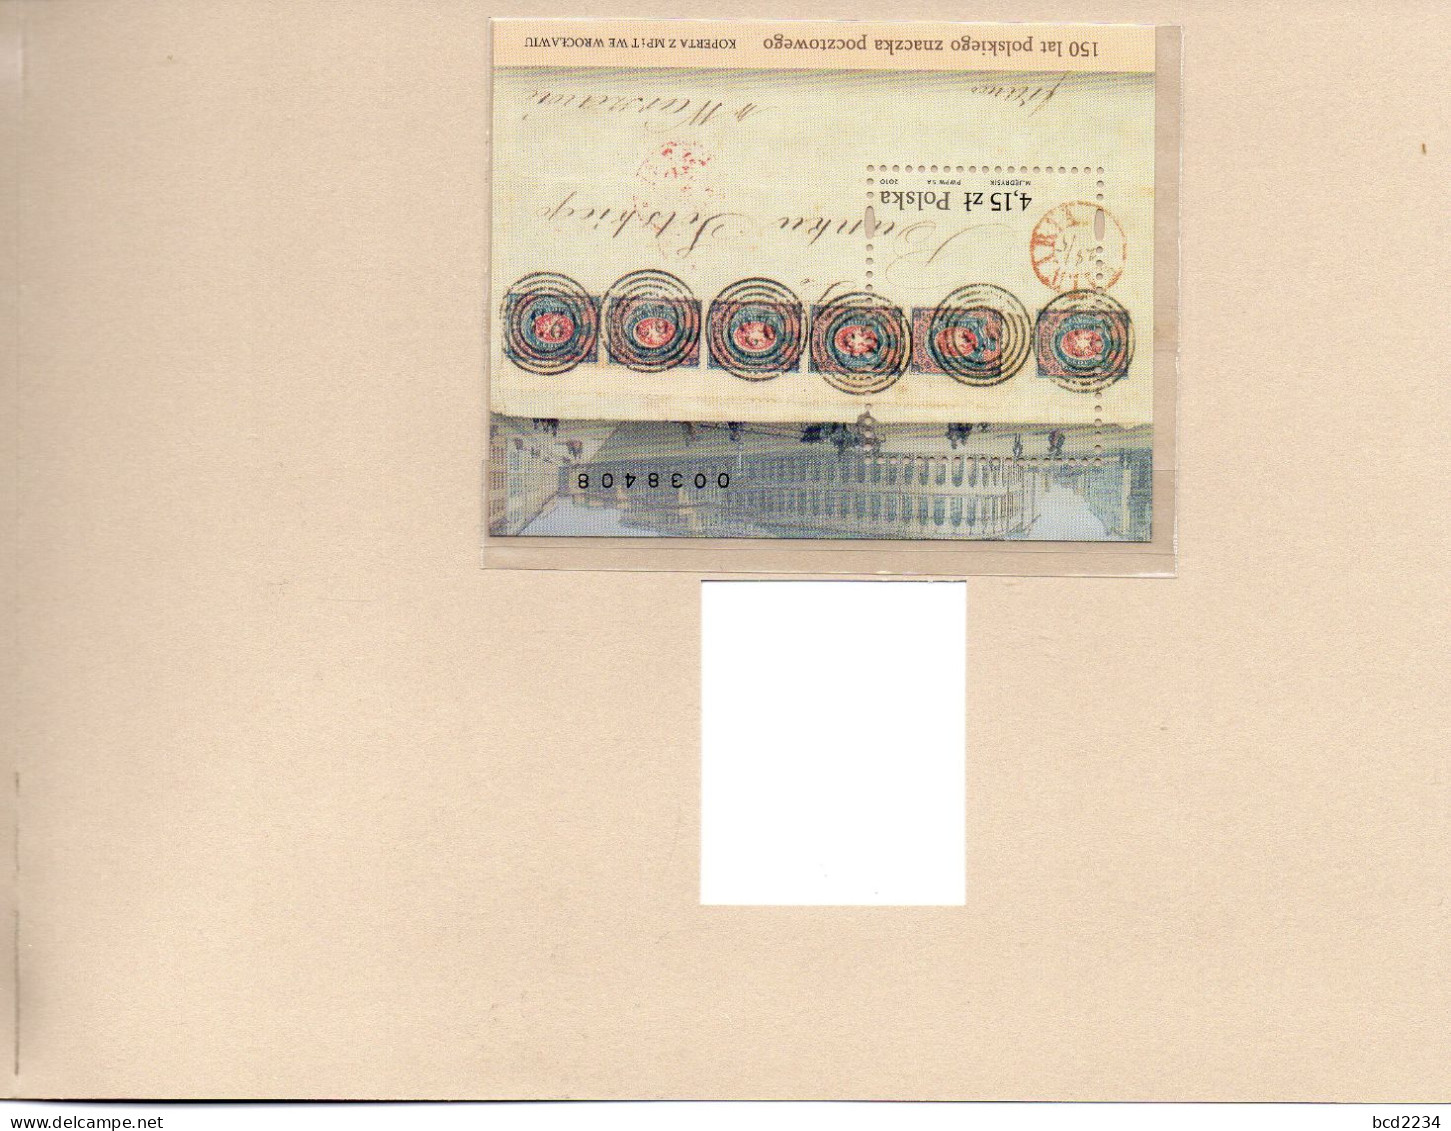 POLAND 2010 POLISH POST OFFICE LIMITED EDITION FOLDER: 150 YEARS ANNIVERSARY 1860 FIRST POLISH STAMP FDC & MS & ENVELOPE - Covers & Documents